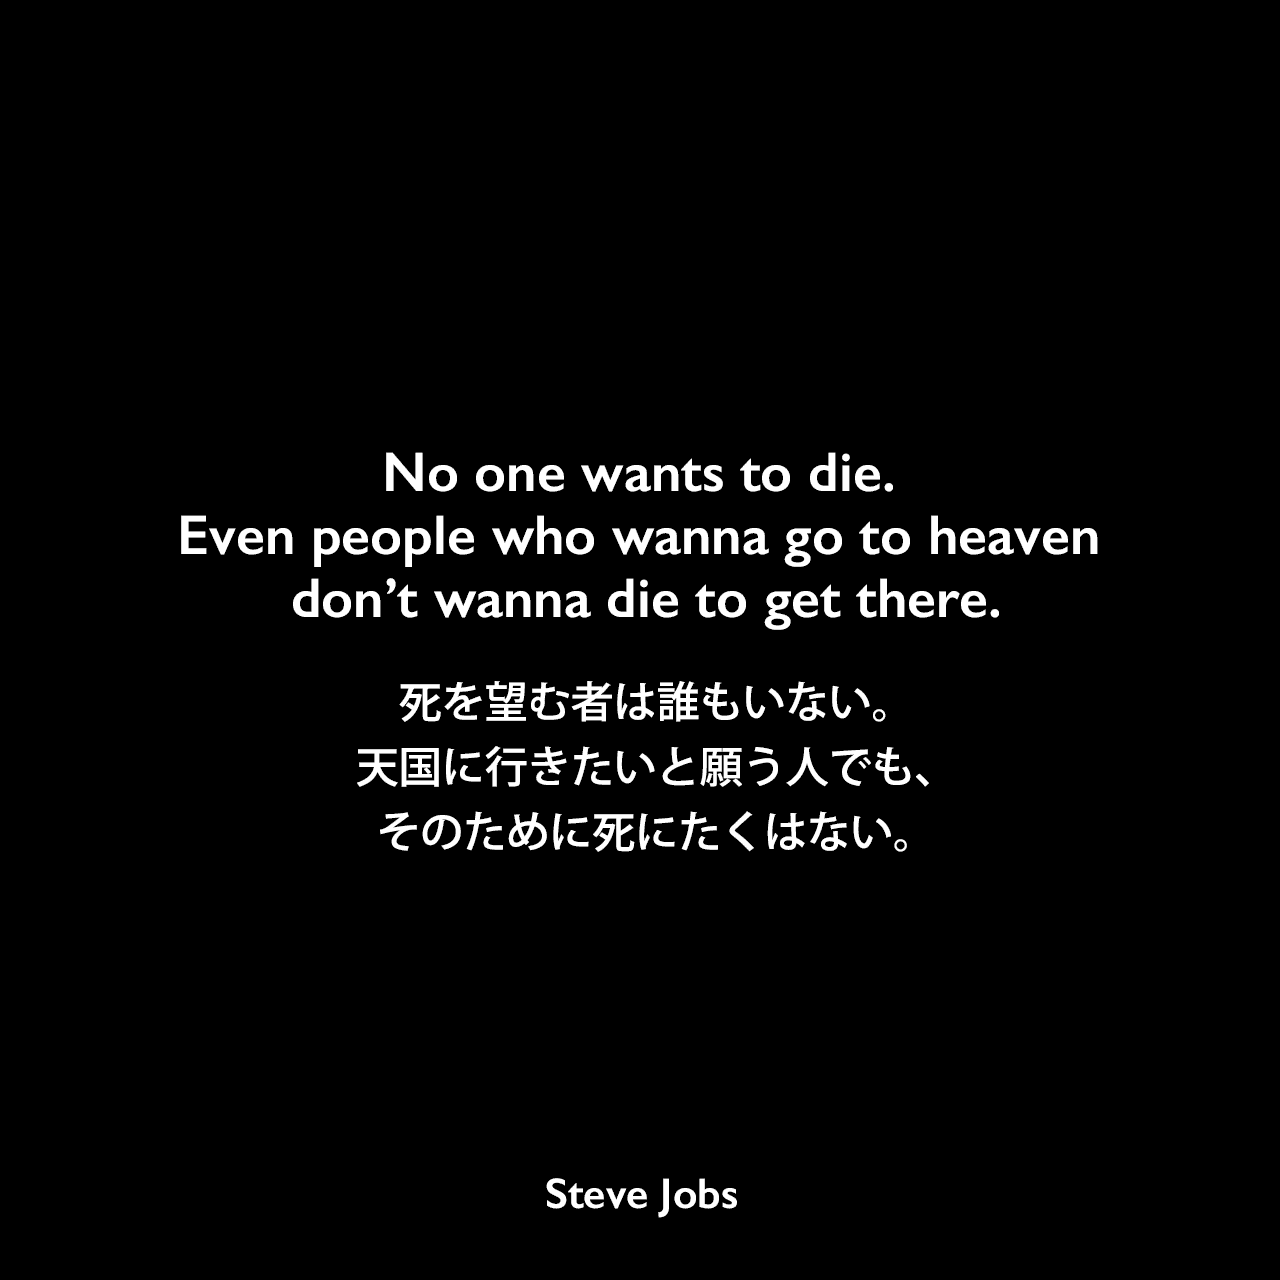 No one wants to die. Even people who wanna go to heaven don’t wanna die to get there.死を望む者は誰もいない。天国に行きたいと願う人でも、そのために死にたくはない。- 2005年6月12日 スタンフォード大学卒業式でのスピーチよりSteve Jobs